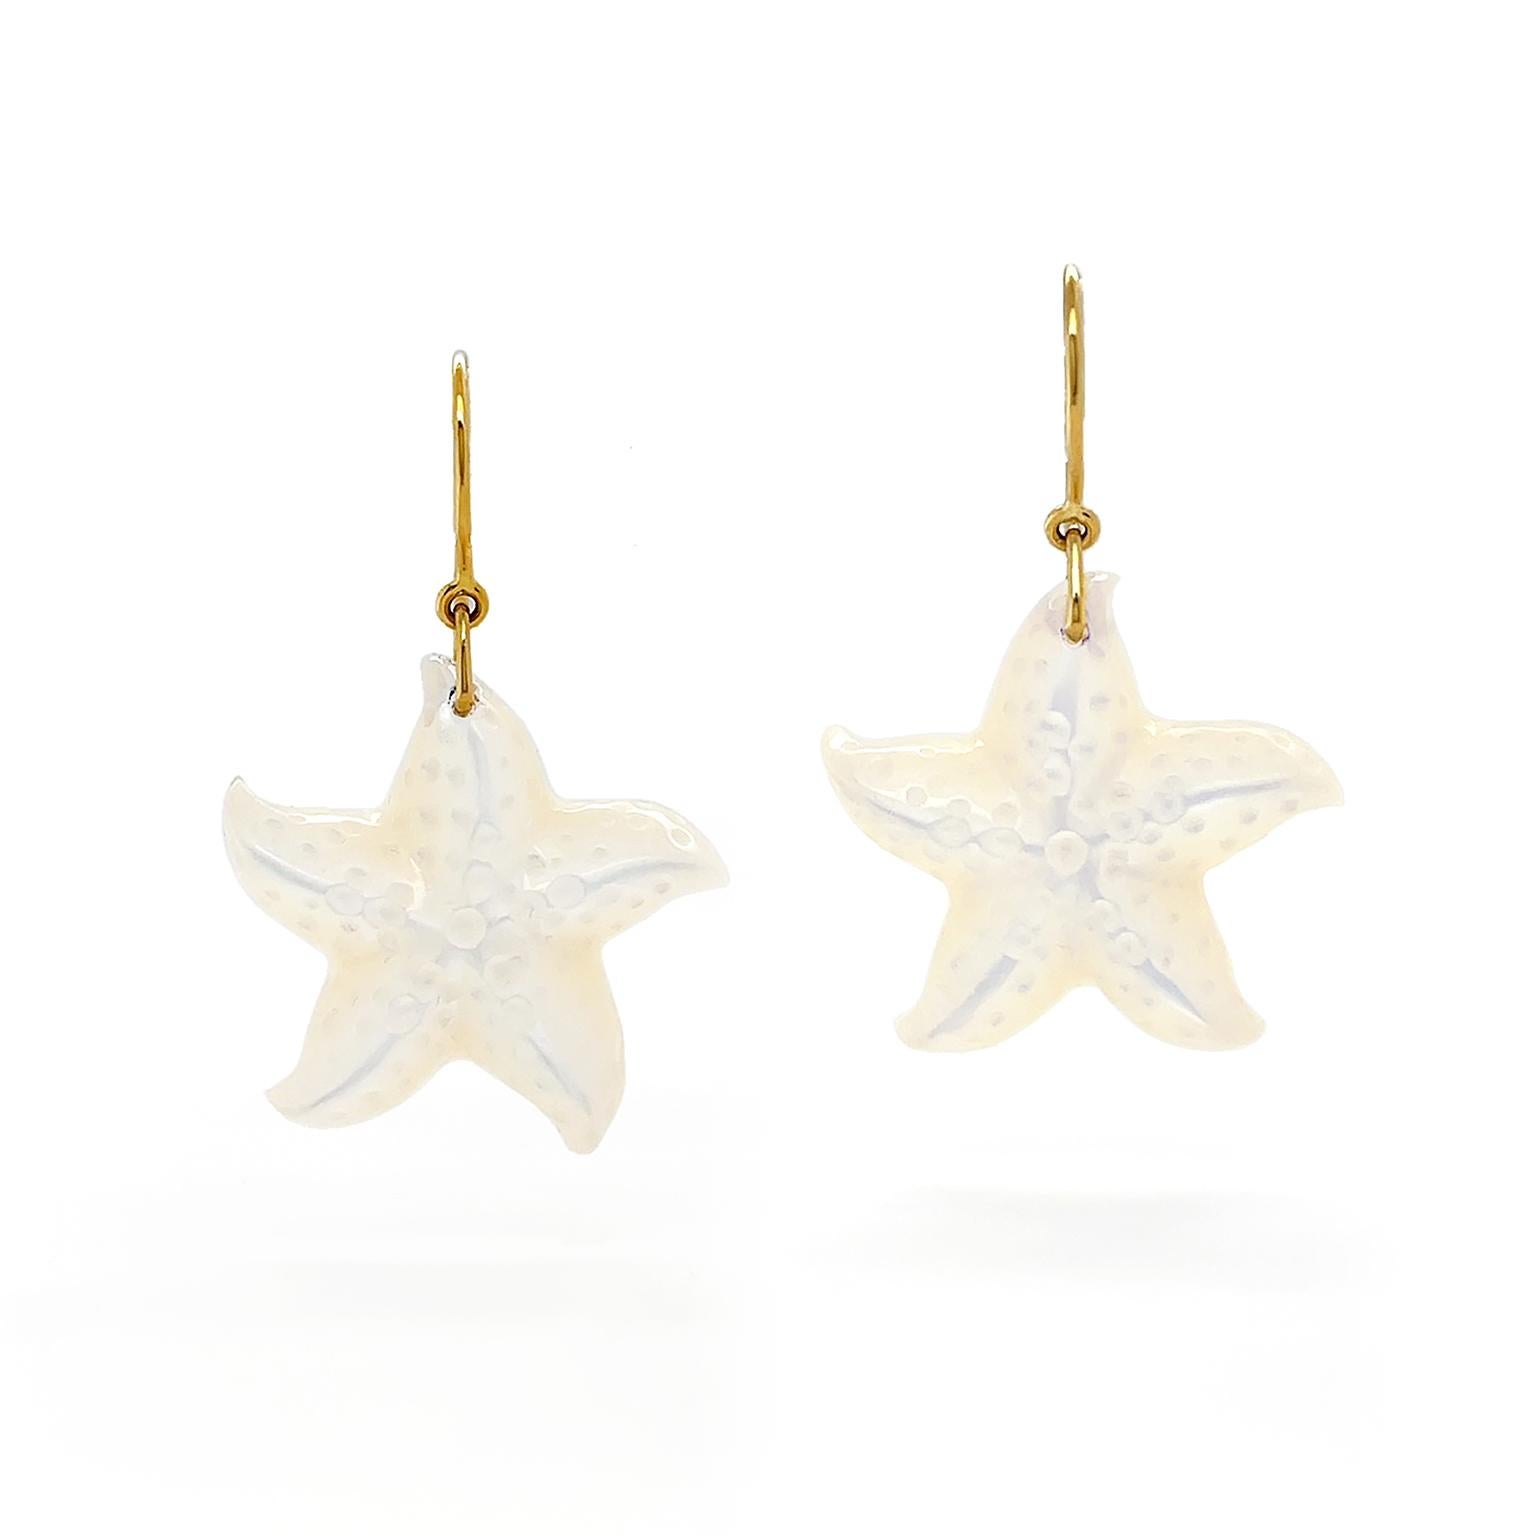 The shimmer of the mother of pearl gives an ethereal essence as it illustrates starfish. Artisanship in the design includes softly curved arms and texture throughout. The total weight of the mother of pearl is 2 carats. 18k yellow gold French hooks